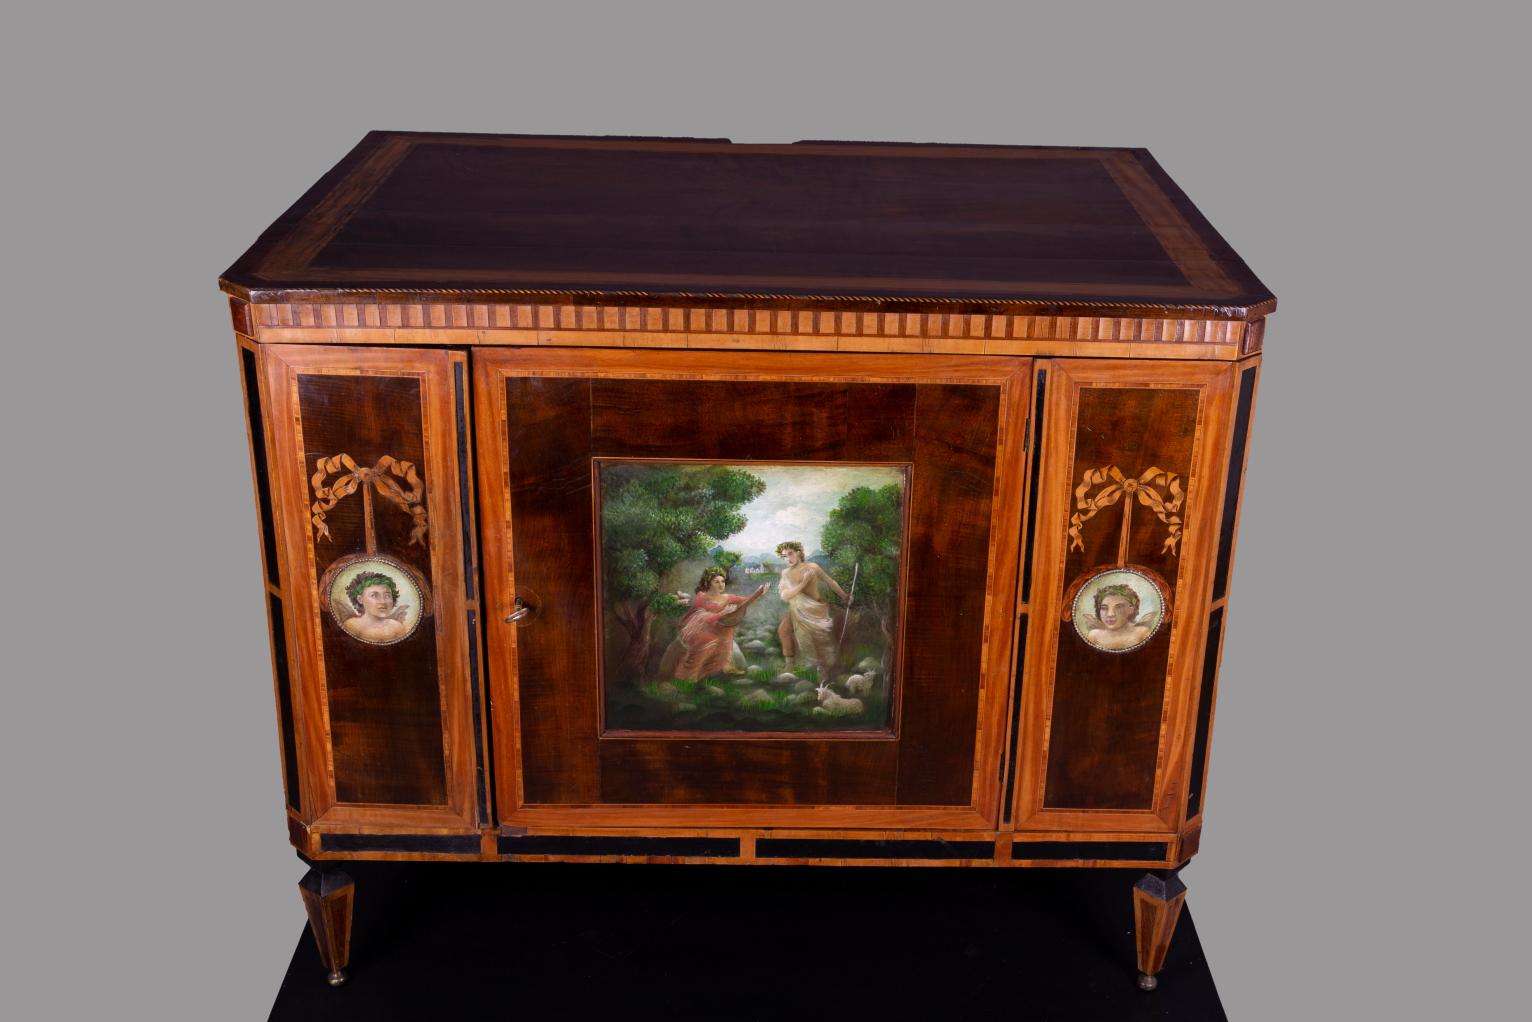 Neoclassical mahogany cabinet/commode, with painted panels - circa 1800.  